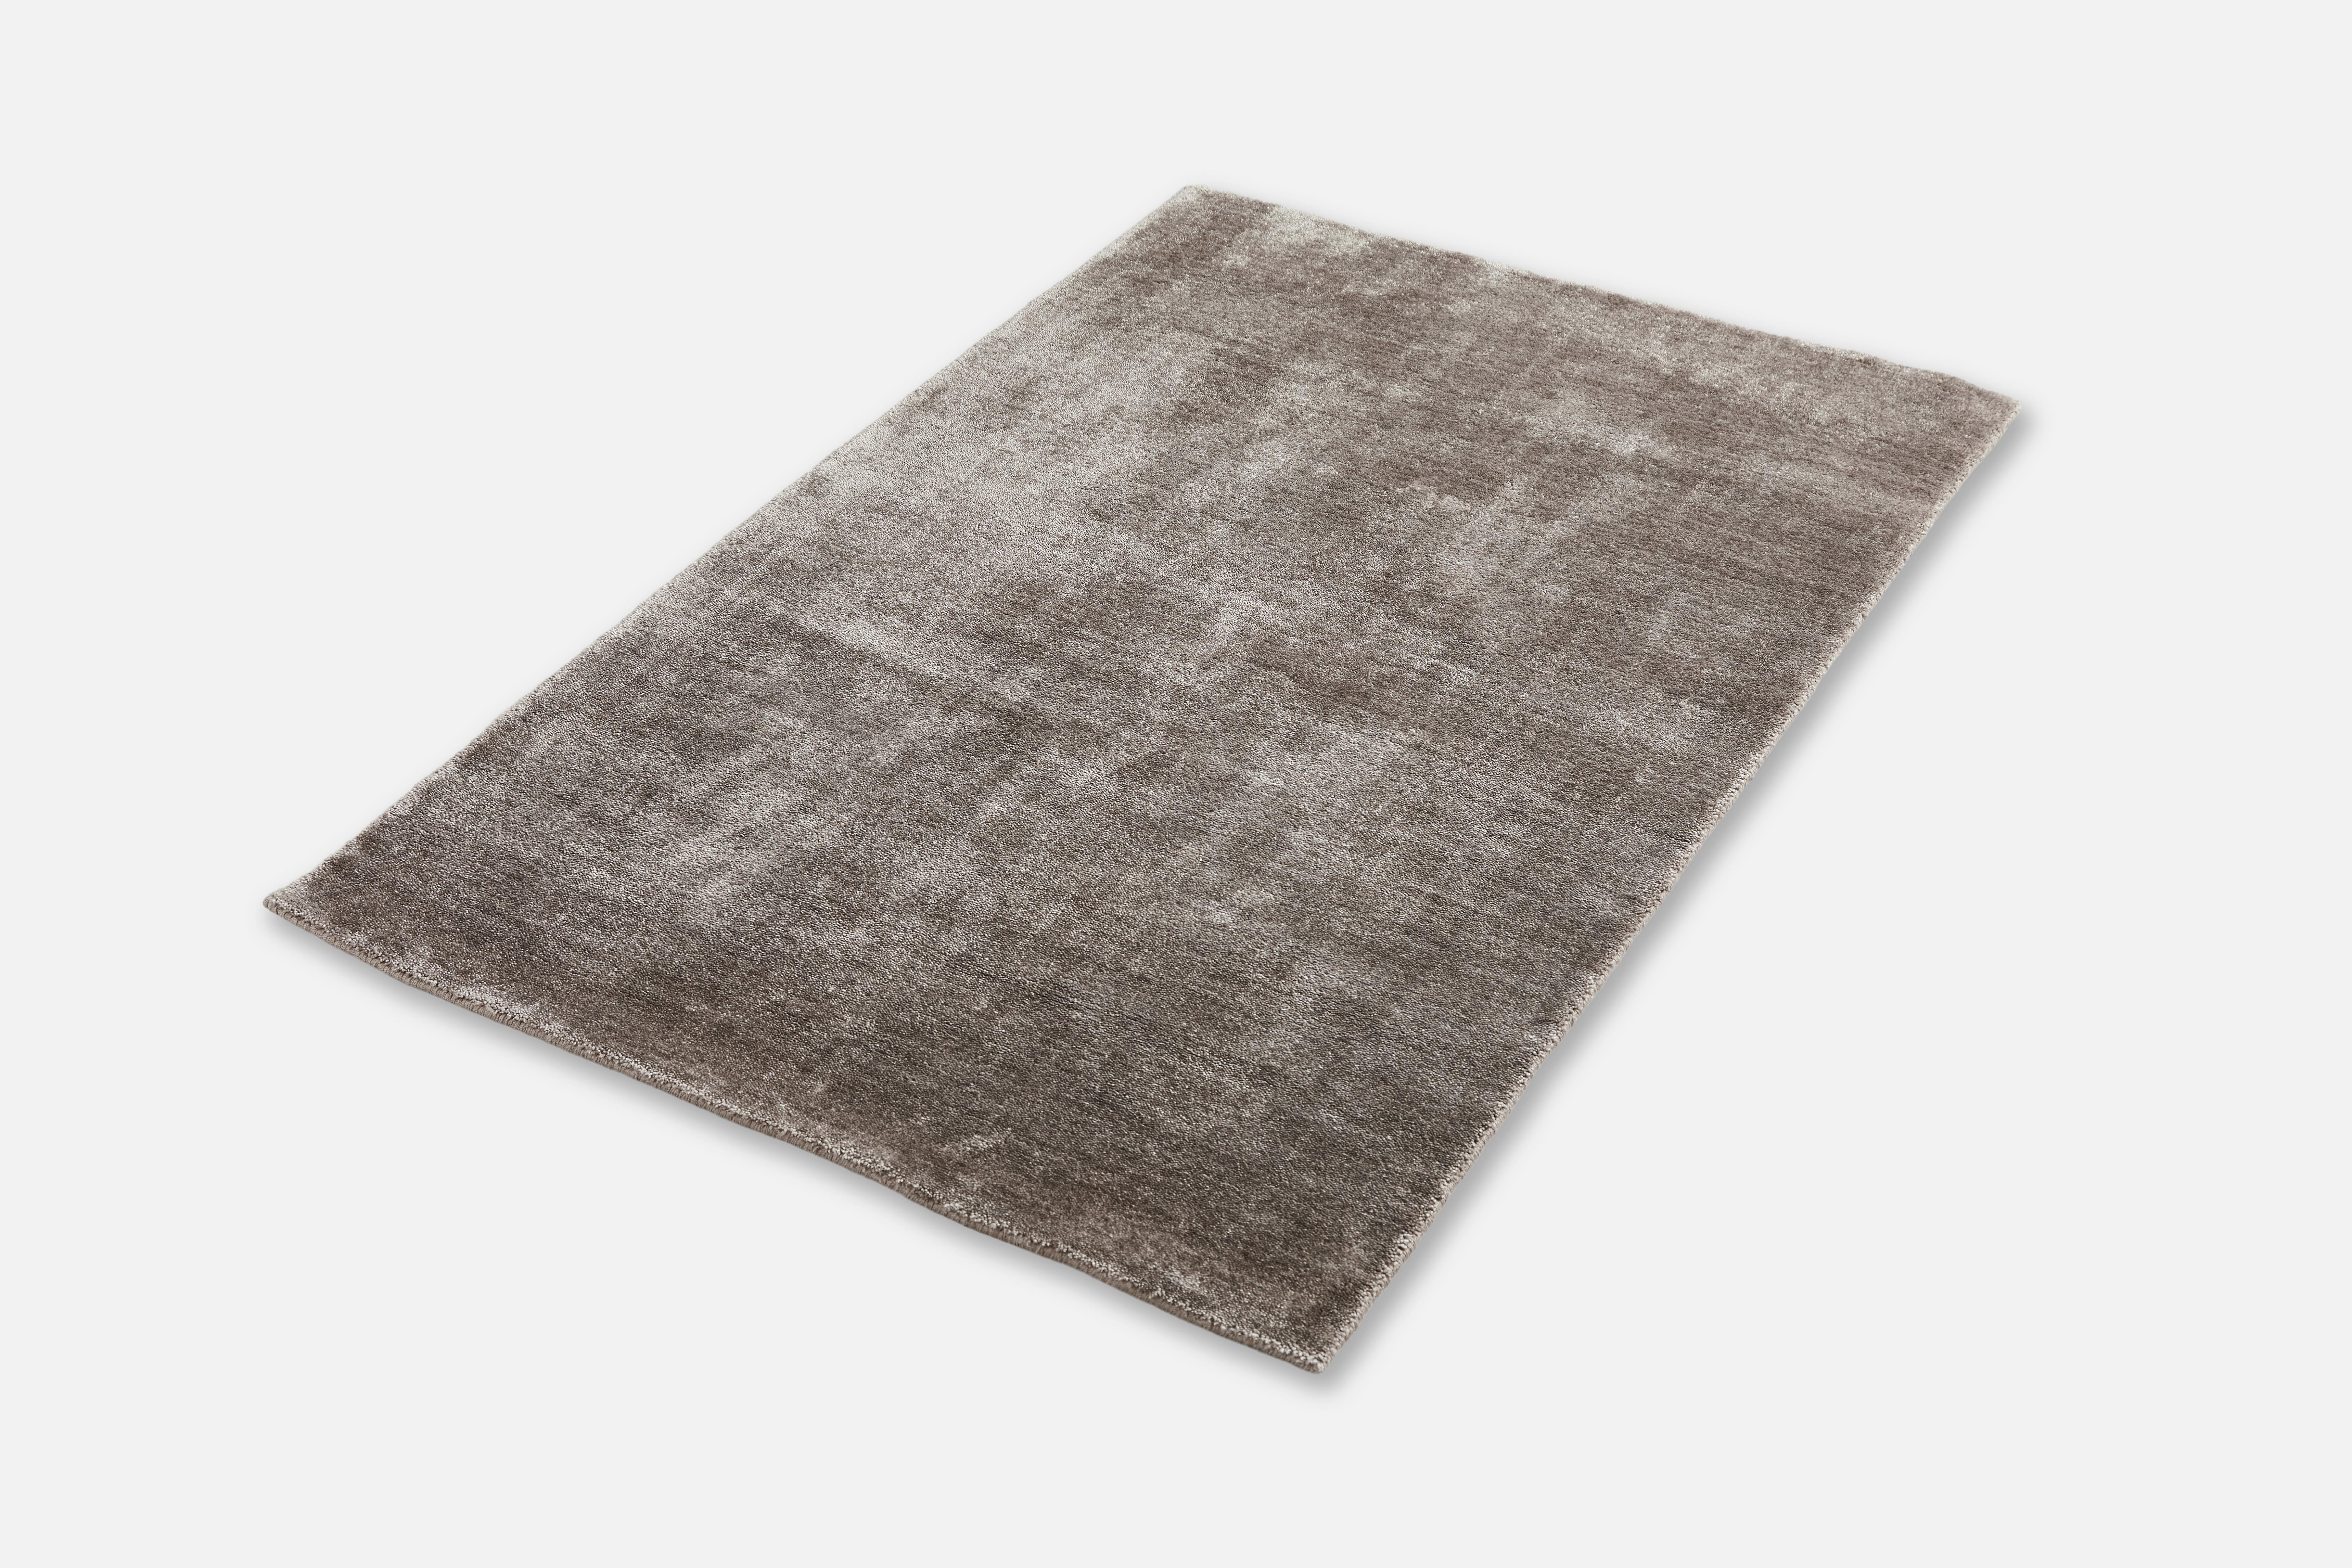 Tint rug by Shazeen
Materials: 80% bamboo silk, 20% cotton.
Dimensions: W 170 x L 200 cm
Available in 3 sizes: W90 x L140, W170 x L240, W200 x L300 cm.

Growing up as a child experiencing the inside of the carpet world, Shazeen Ansari has